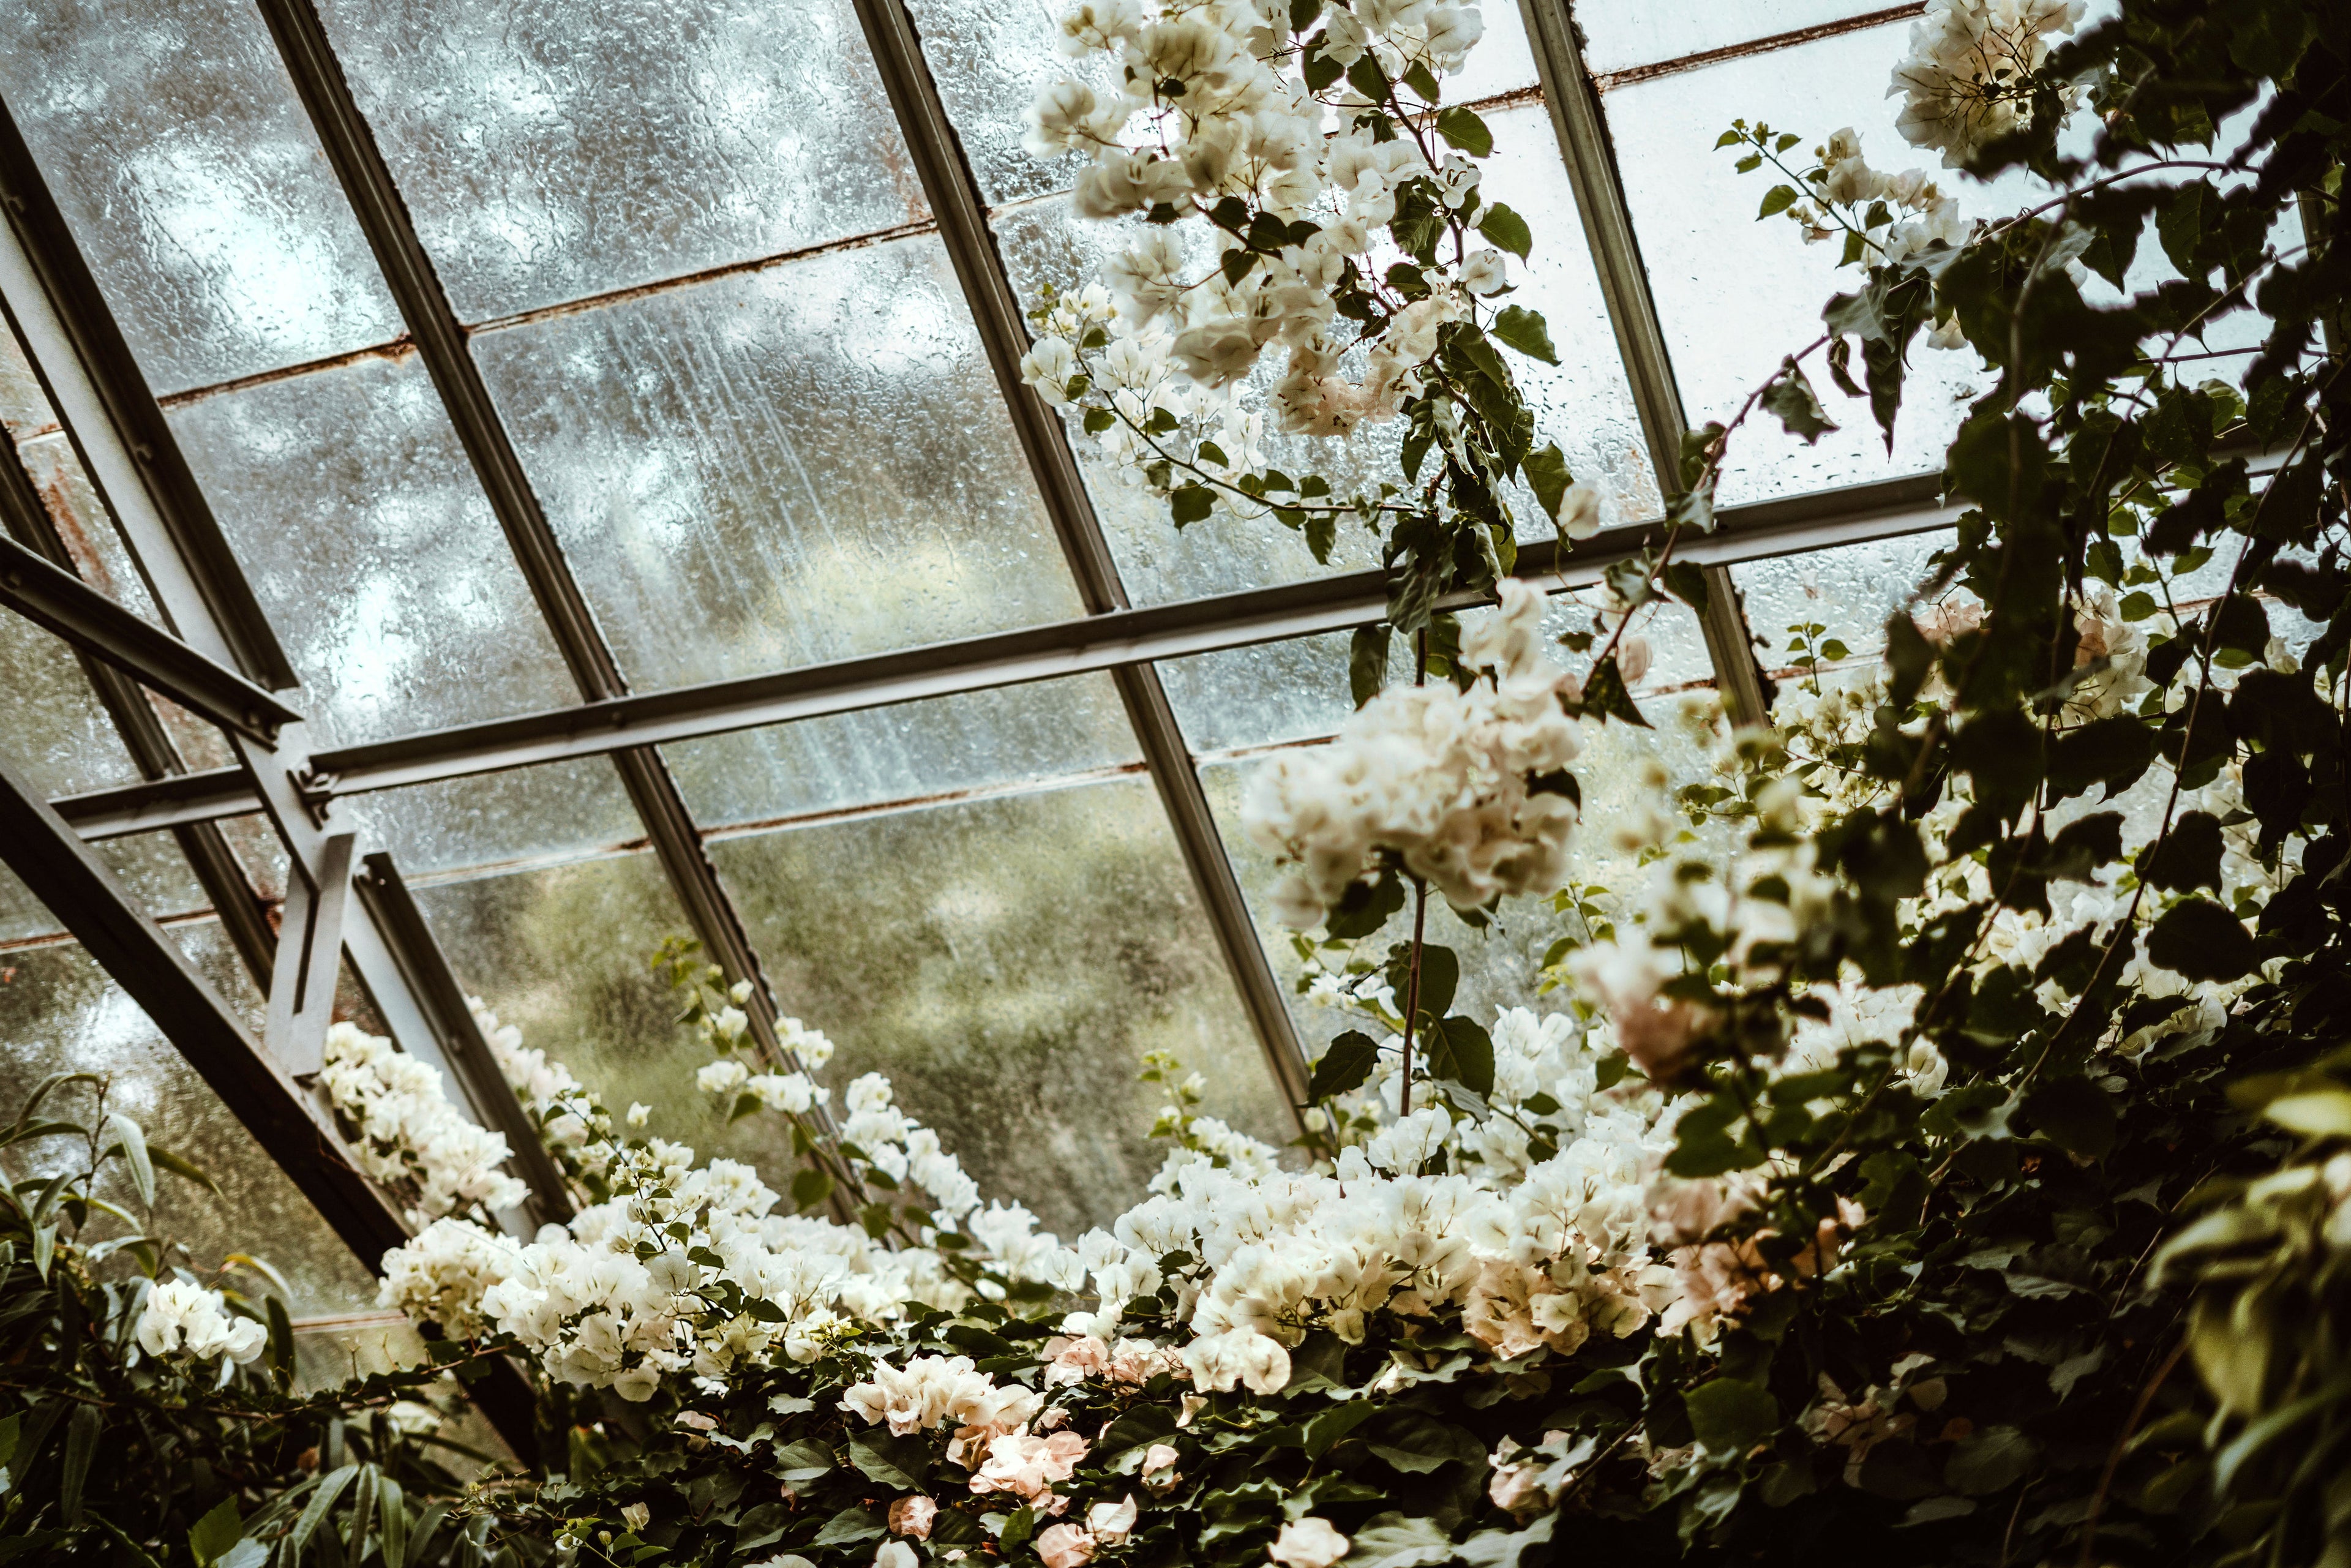 luscious white flowers blooming in a glass greenhouse